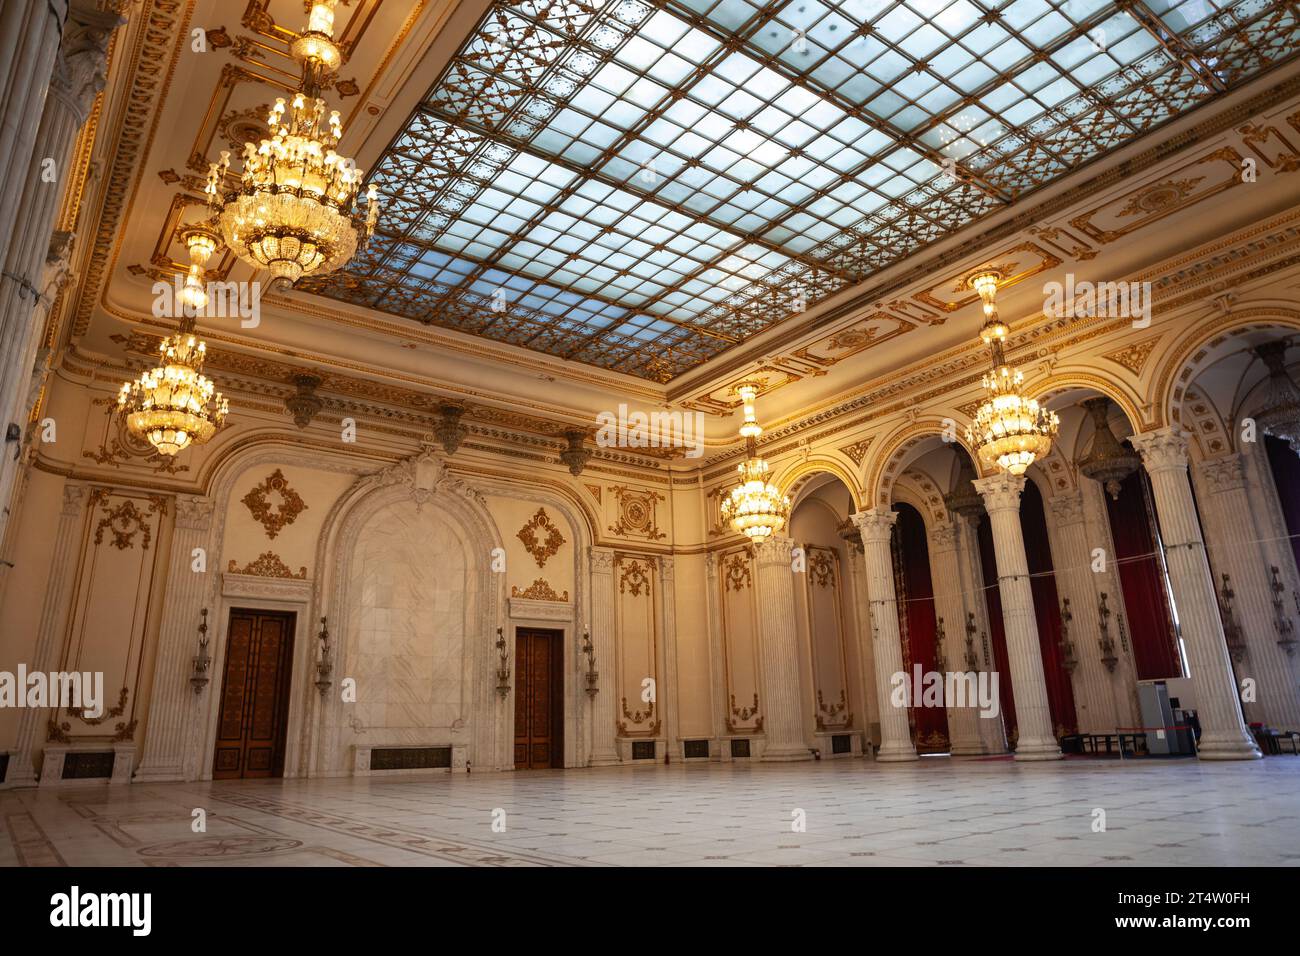 Picture of the interior of the Romanian palace of parliament, with a focus on large wooden doors and chandeliers on a reception hall. The Palace of th Stock Photo